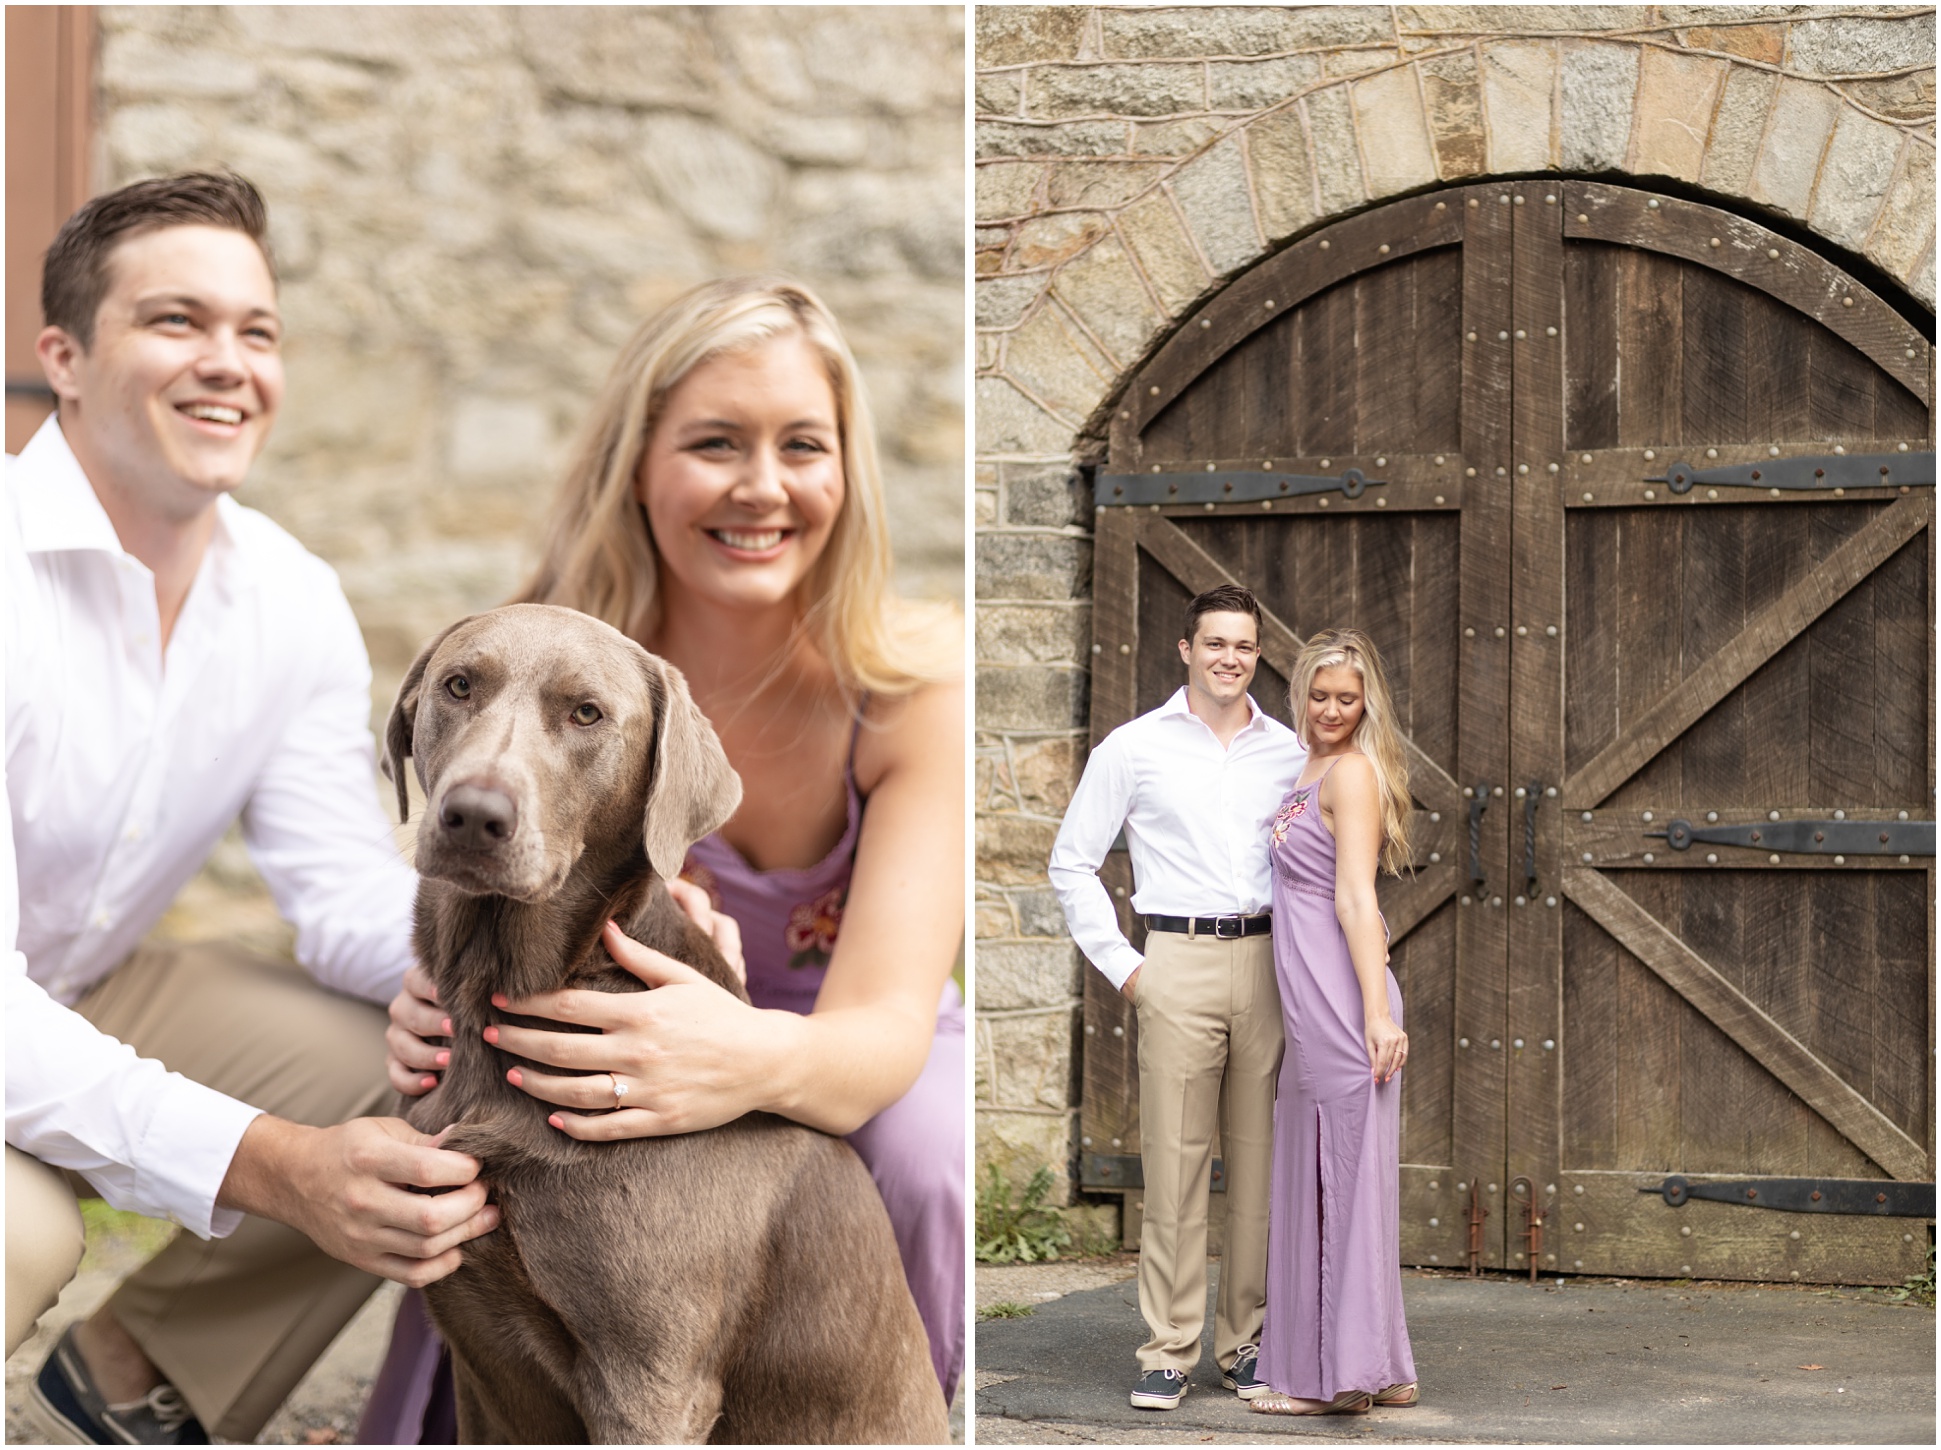 The left image is of katie and rob and their dog kona, the right image is of rob and katie in front of a large wooden arched door